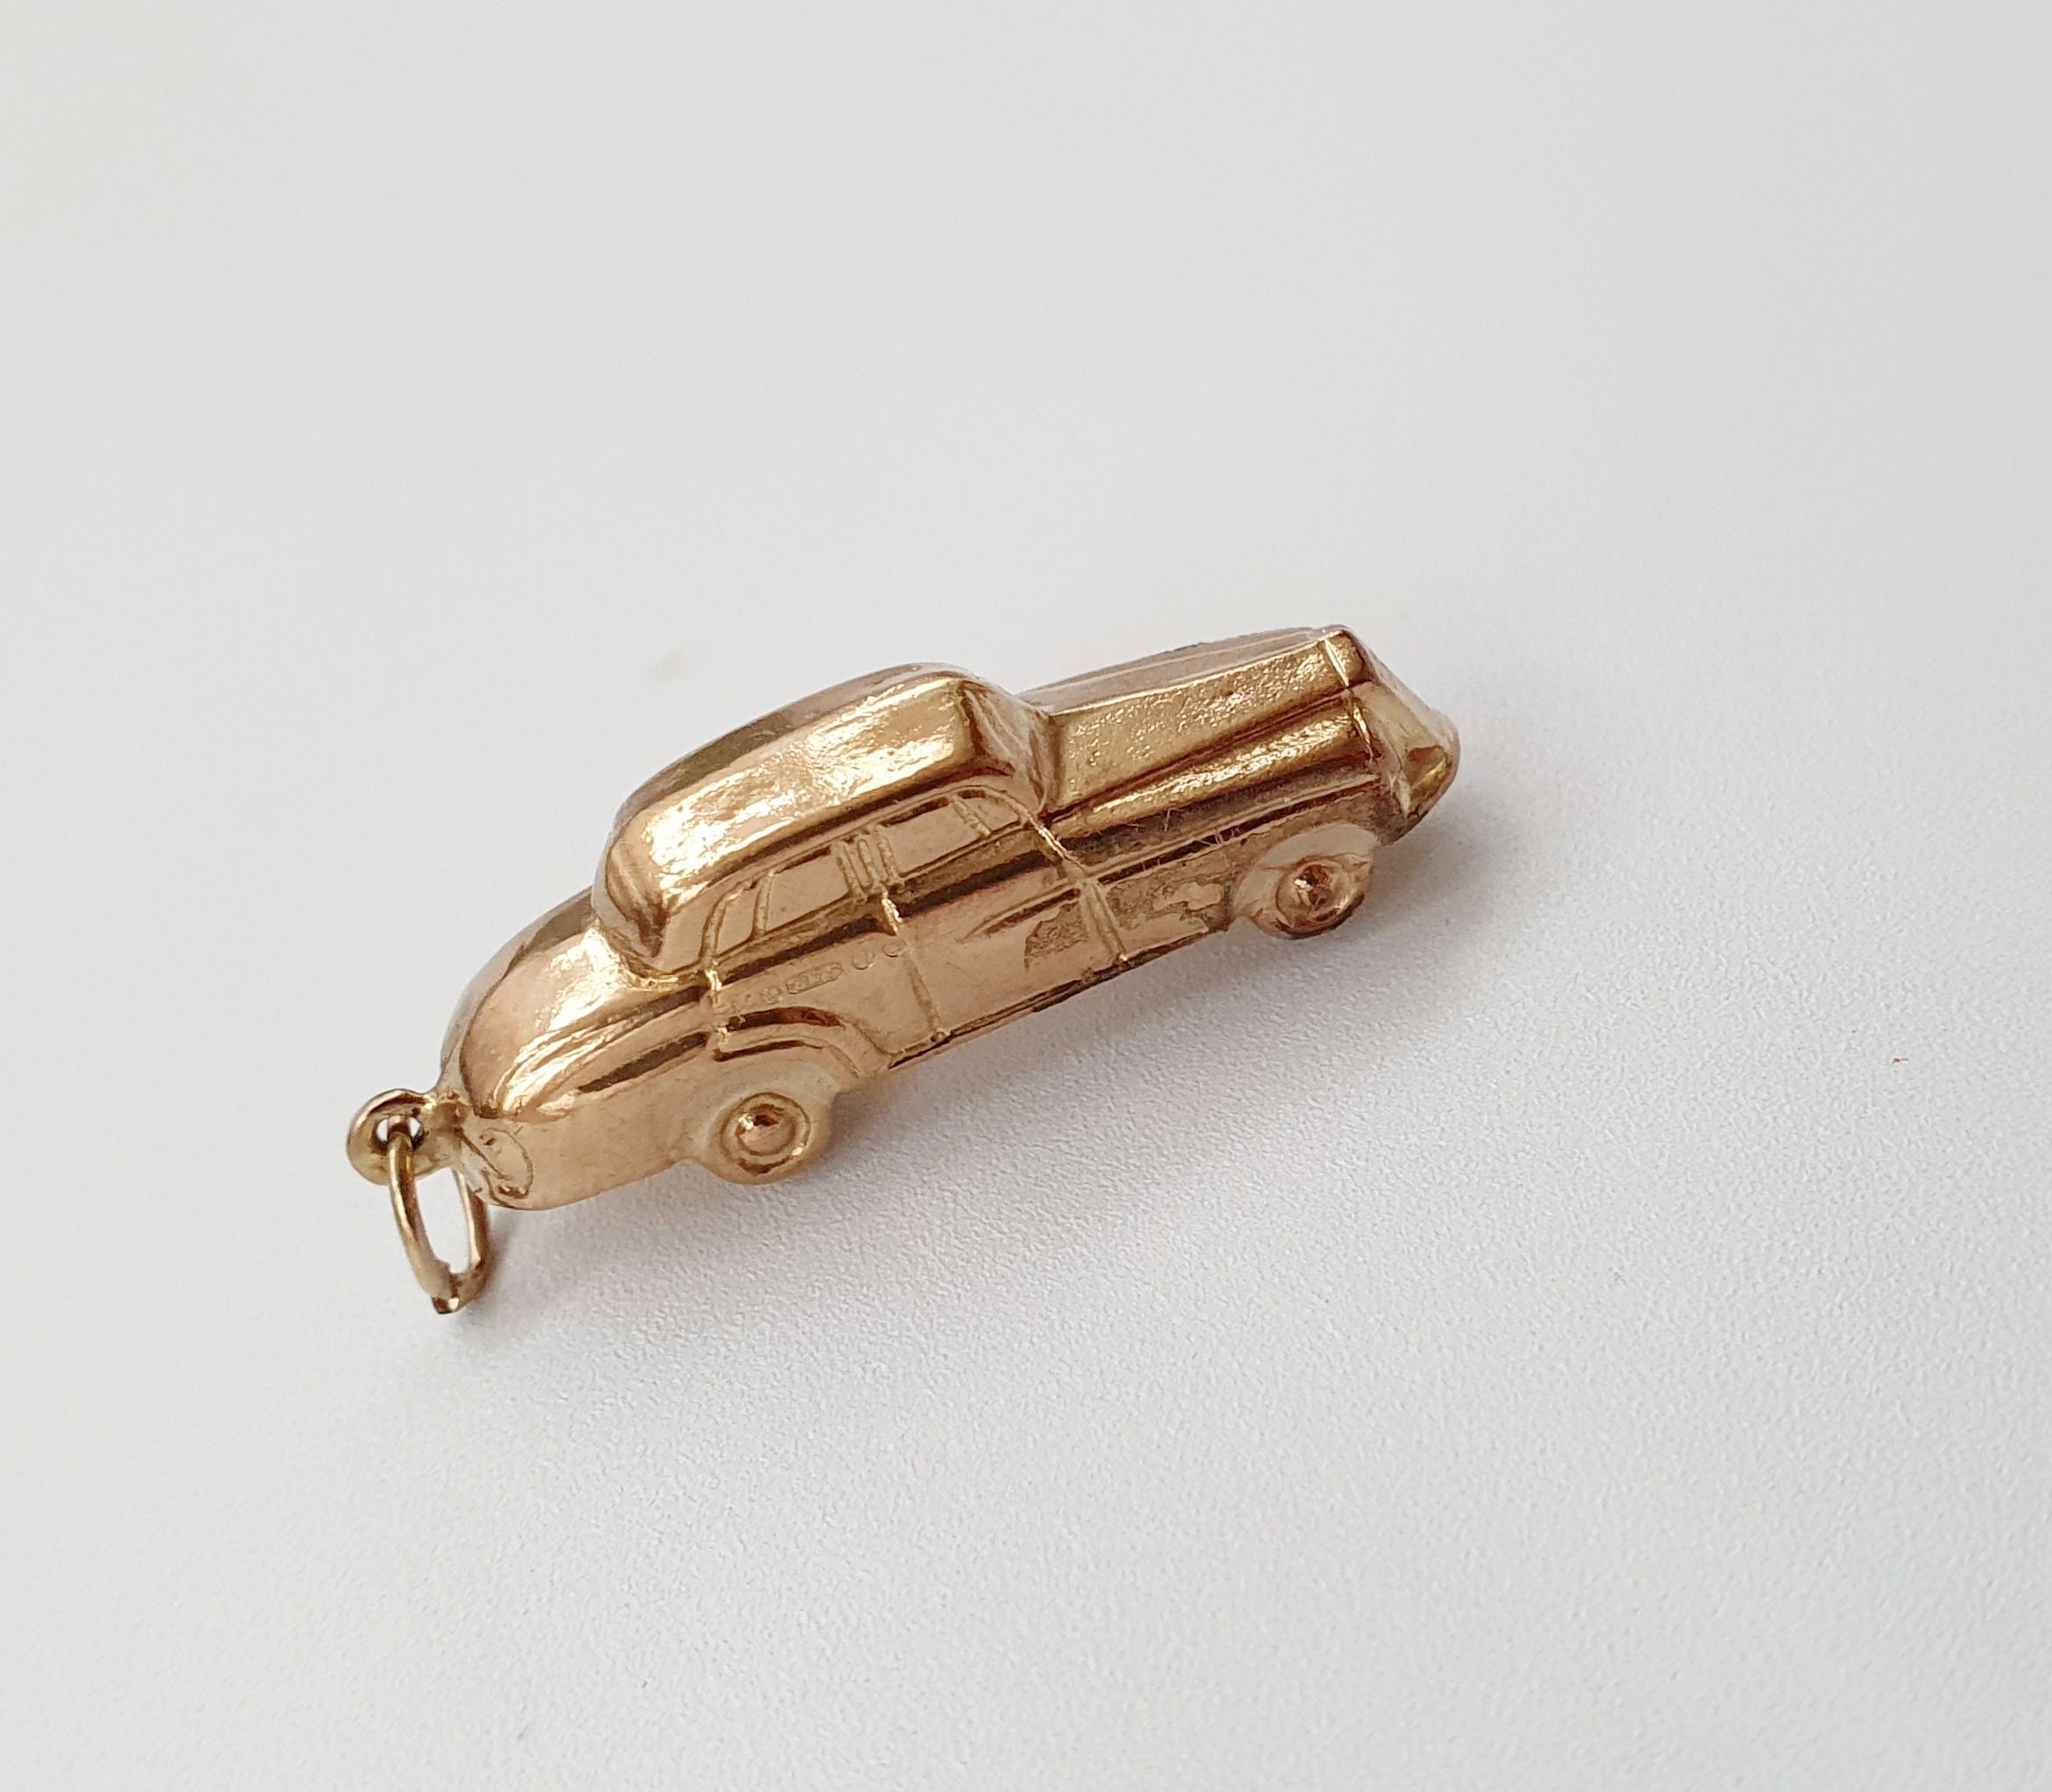 1960s Vintage Classic Chevy Car Key Ring Charm Holder Solid 14k